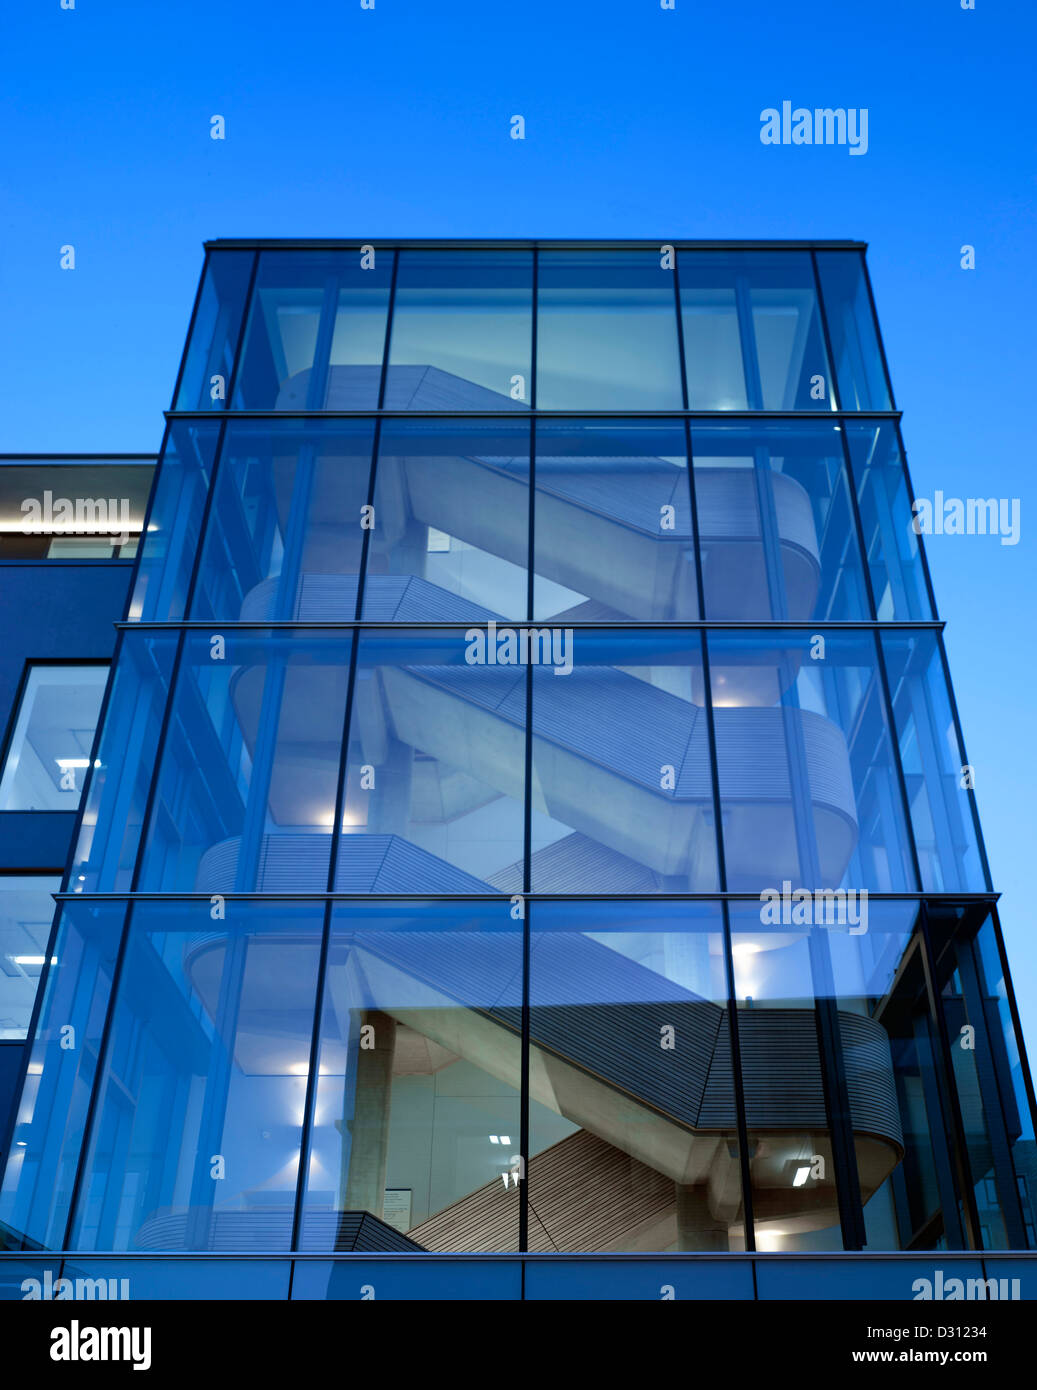 Queen Mary Building, University of London School of Maths, London, United Kingdom. Architect: Wilkinson Eyre Architects, 2012. Stock Photo